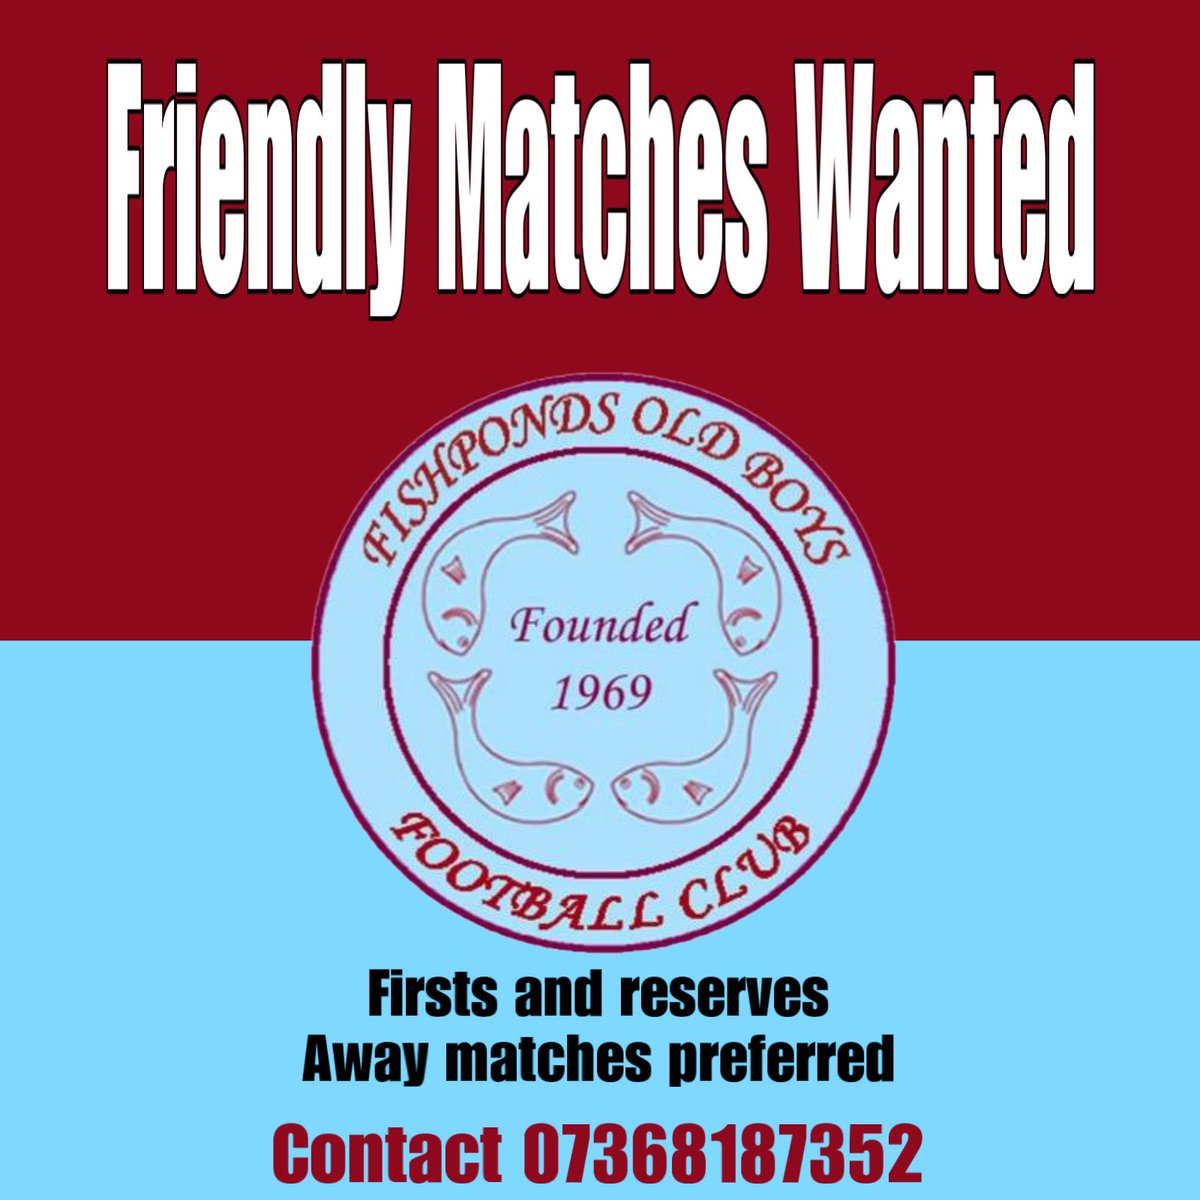 Firsts and reserves both looking for friendly matches season 24/25. Contact 07368187352 if you have availability. Away matches perfect and happy to share costs. #uptheponds